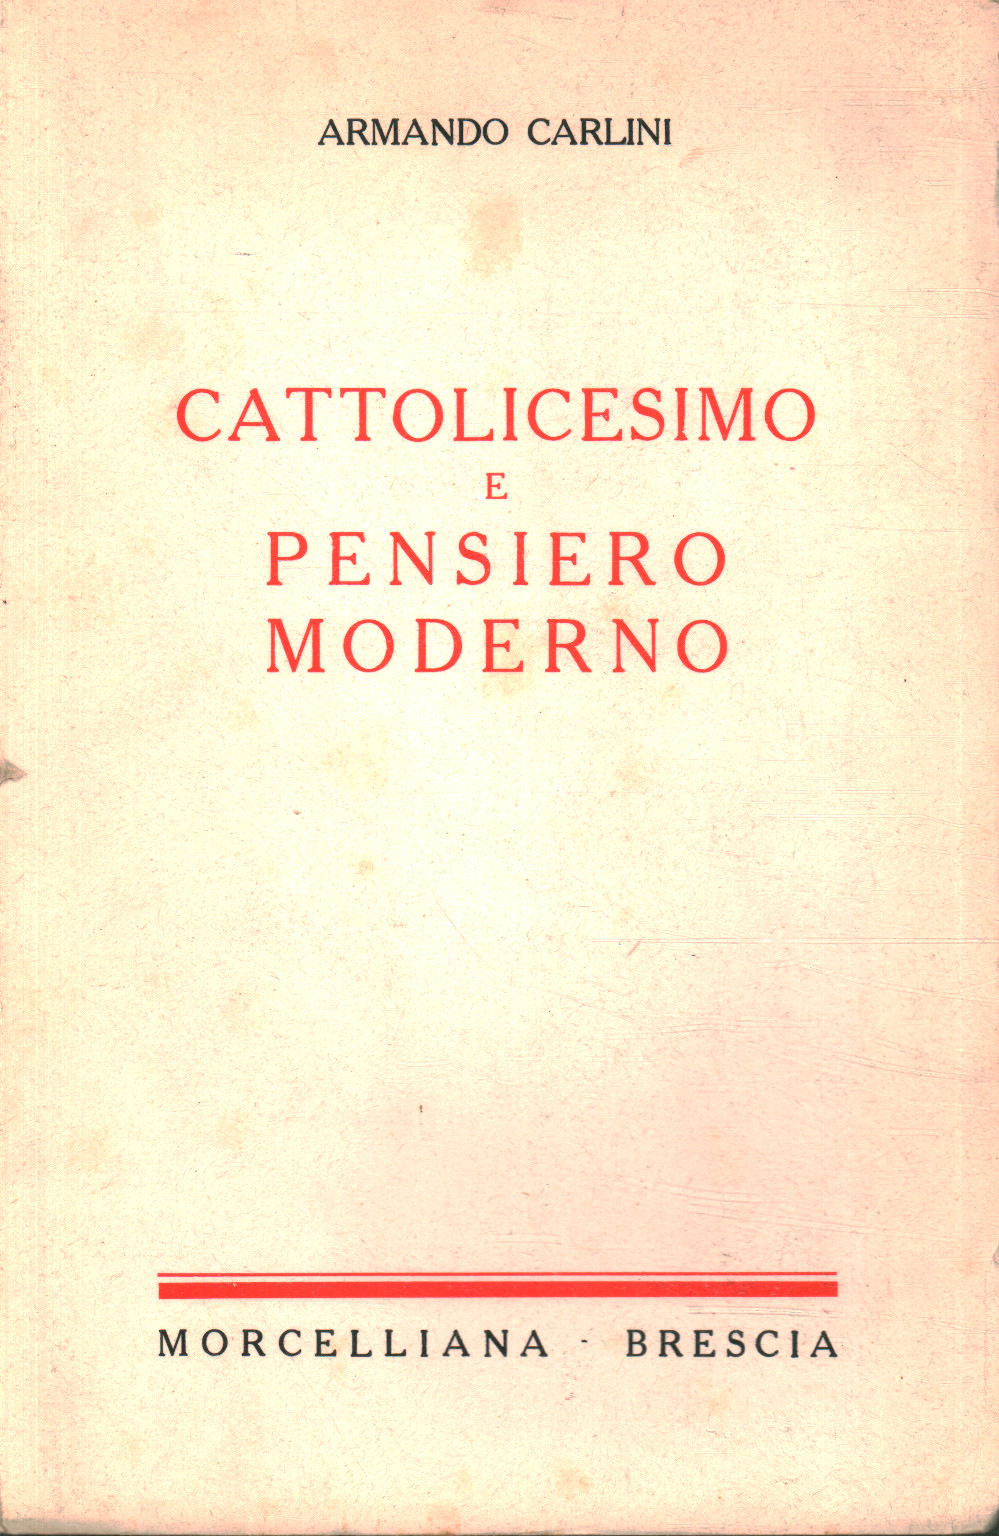 Catholicism and modern thought, s.a.